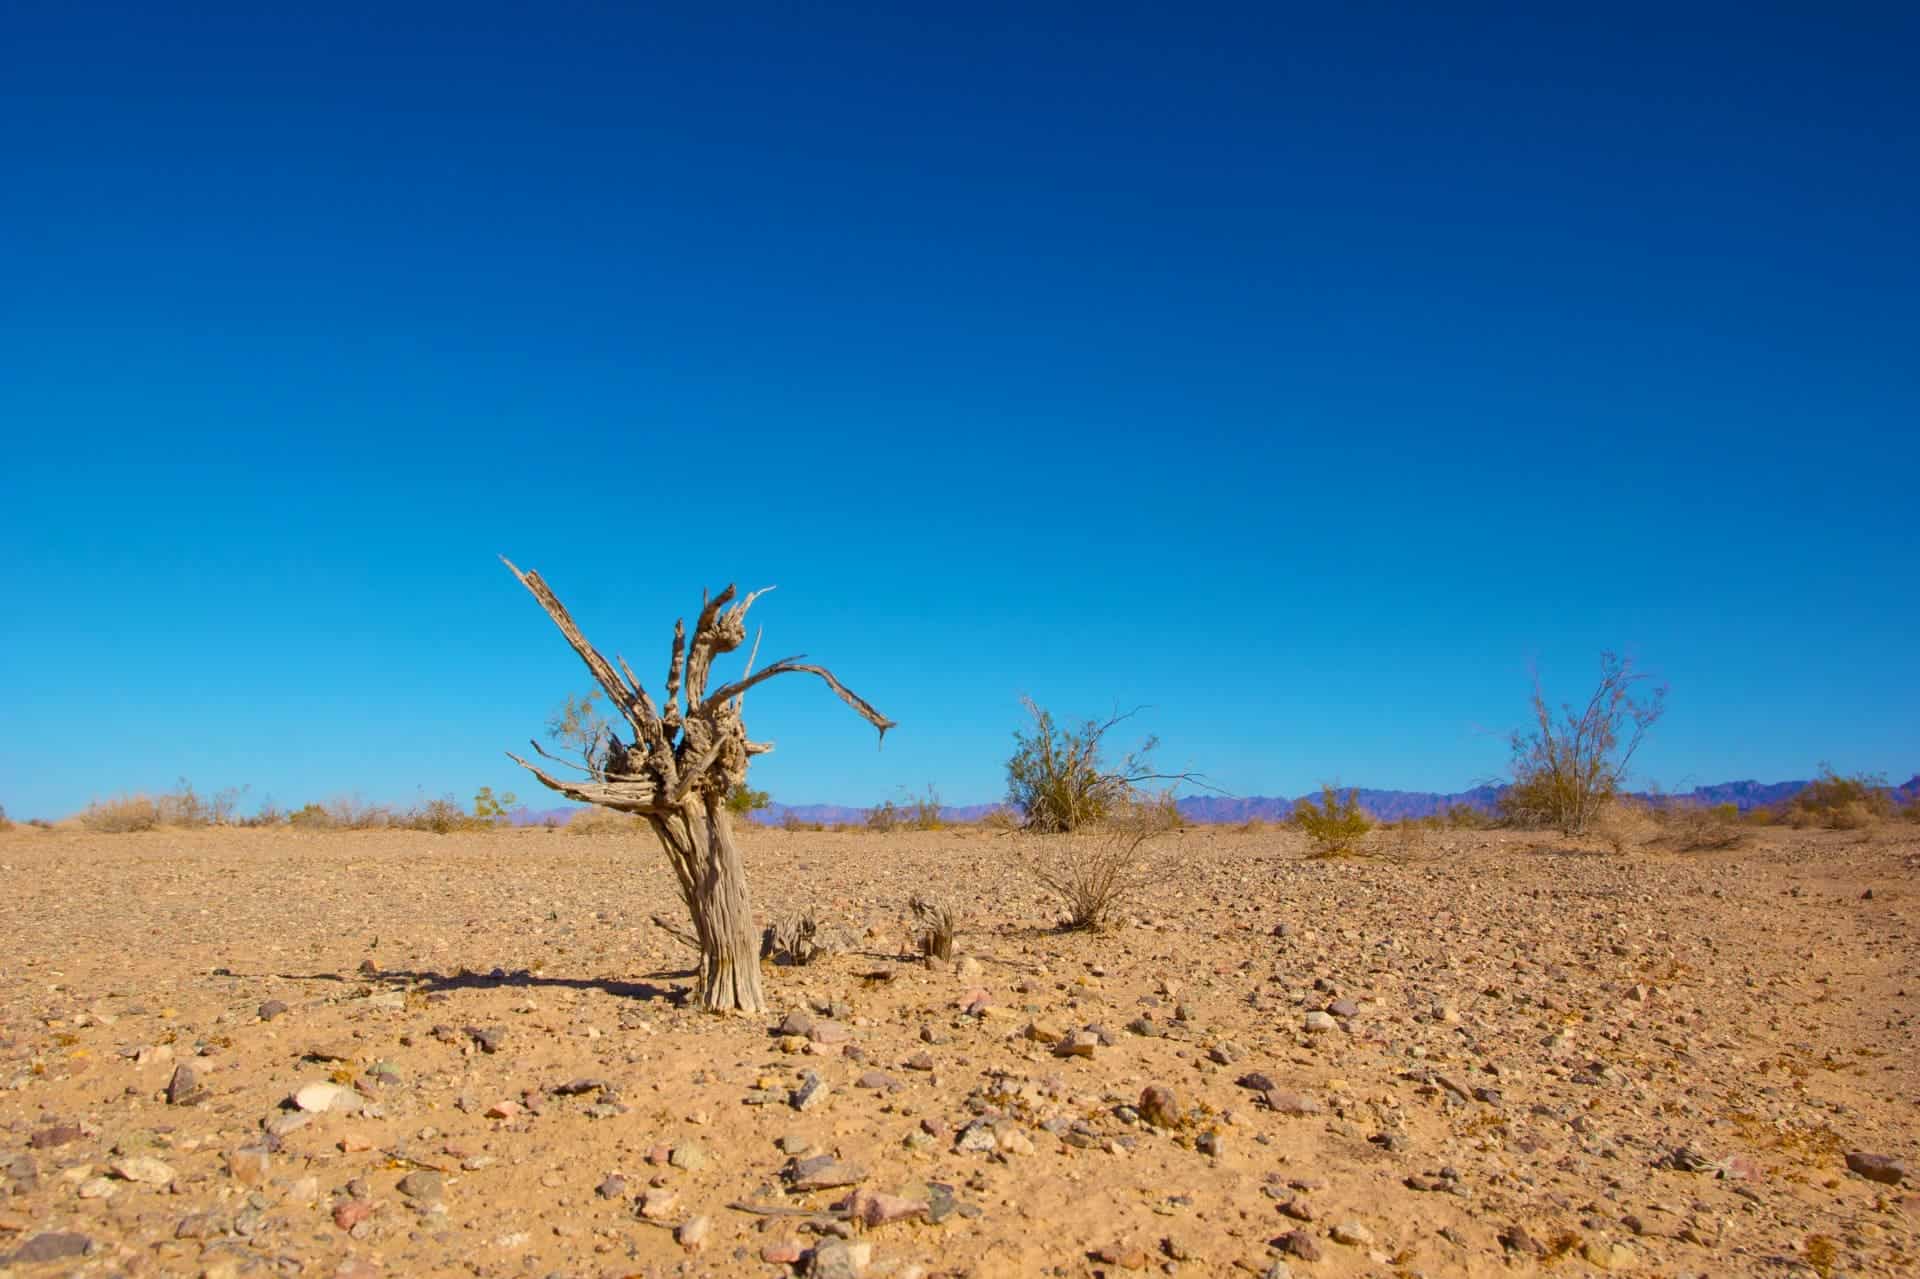 Climate change has been associated with droughts and water scarcity. Image in Public Domain.